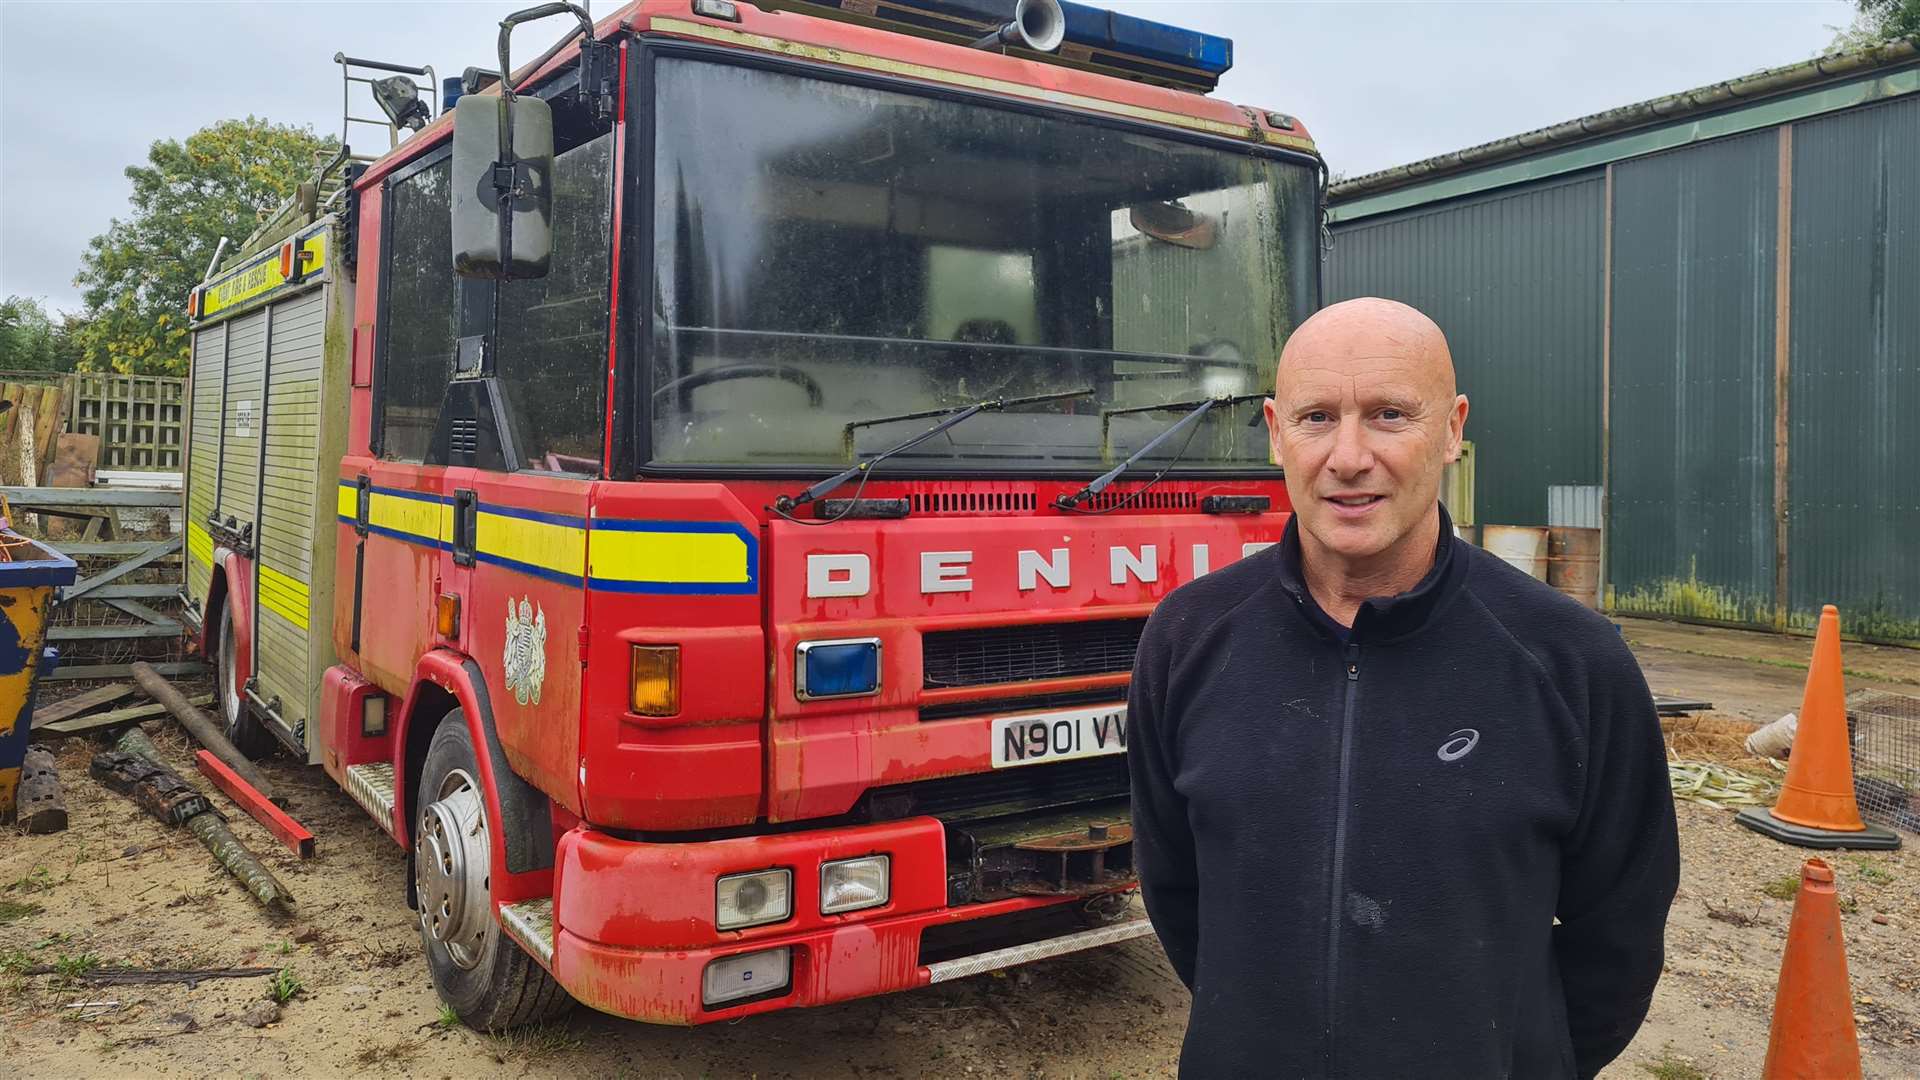 Kris Saxby with his 1994 Dennis fire engine he is selling